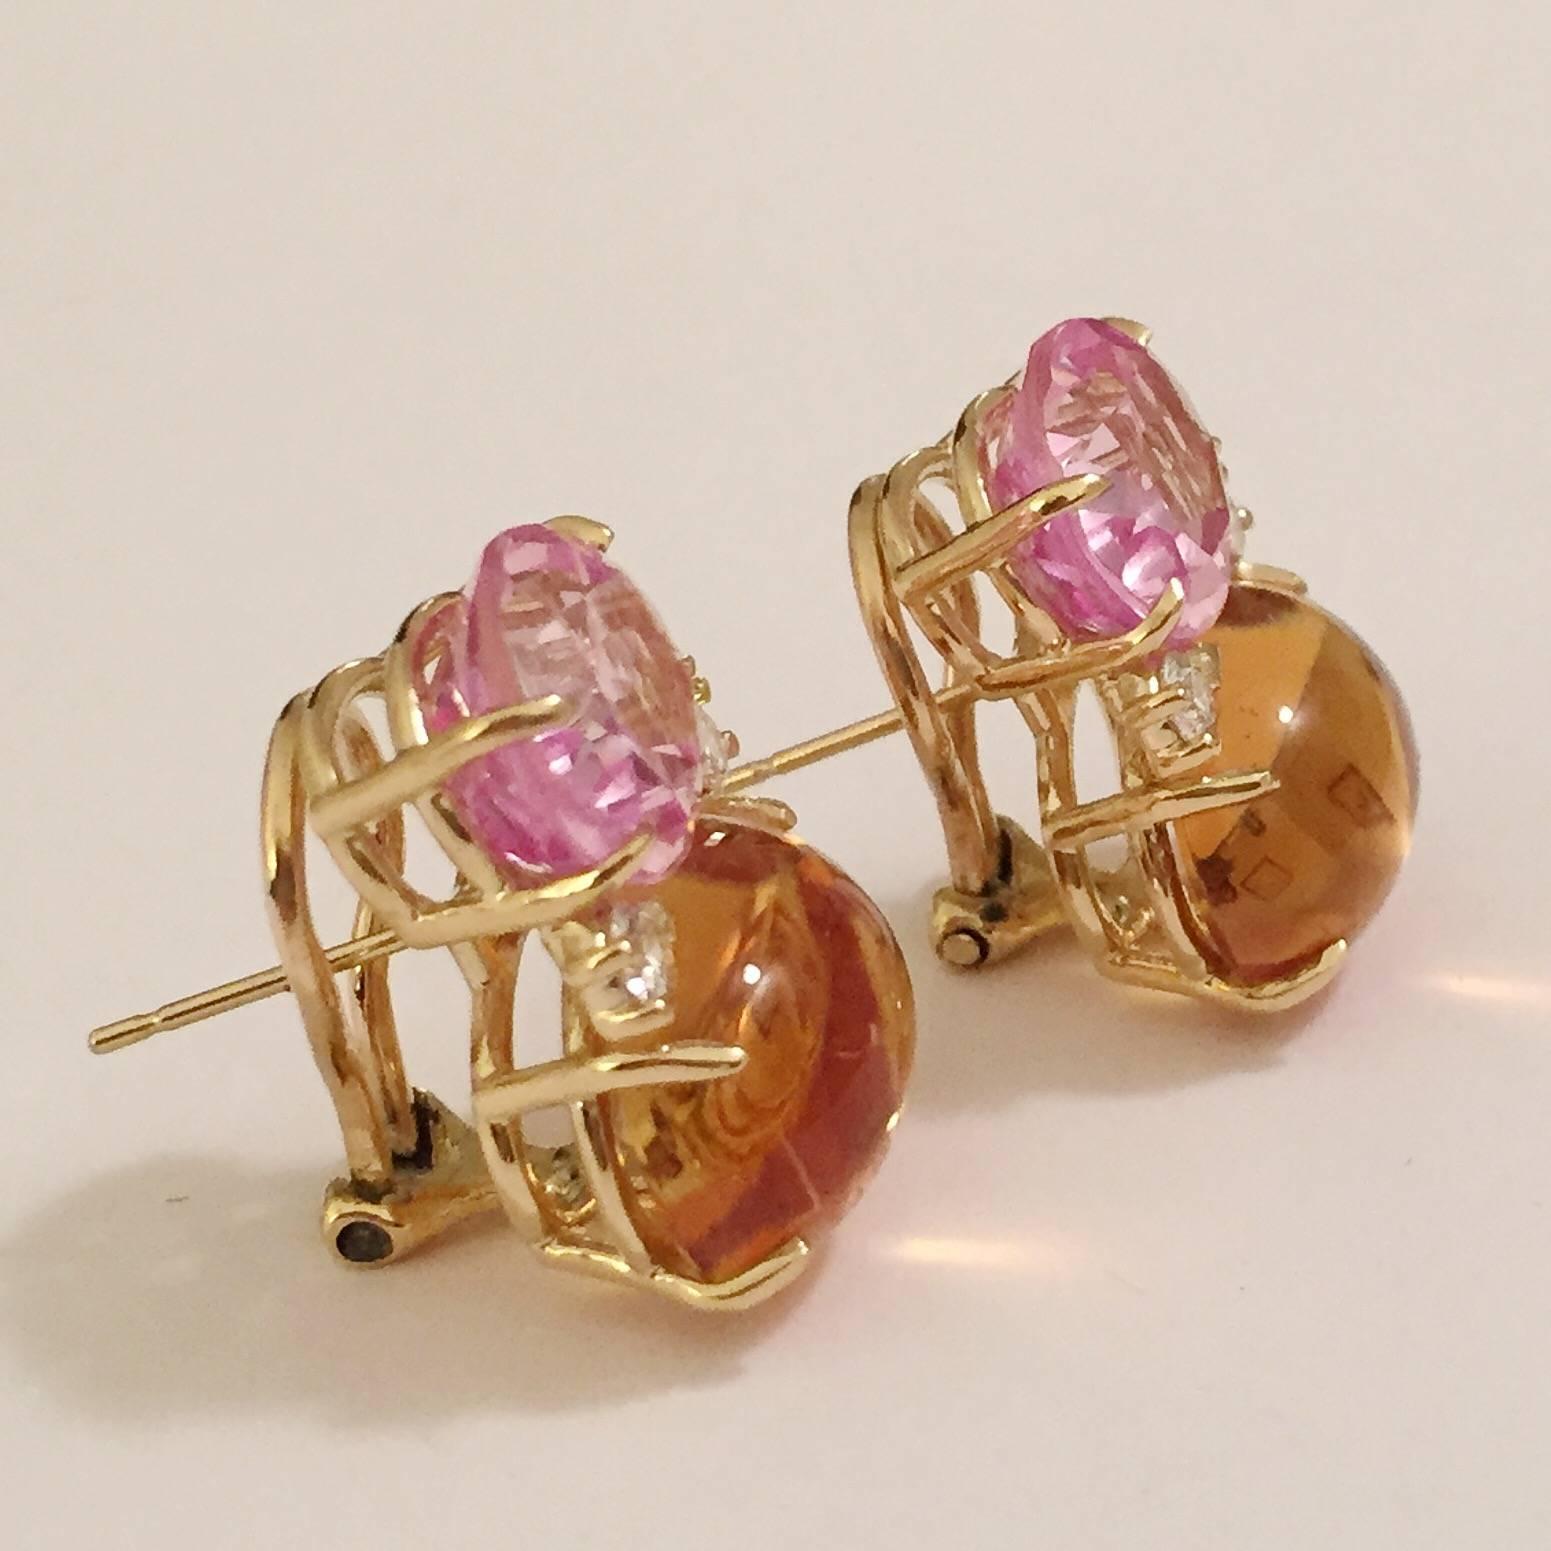 18kt Yellow Gold Large GUM DROP™ Earrings with faceted Pink Topaz and Cabochon Citrine and diamonds.

The Pink Topaz is approximately 5 cts each and the Cabochon Citrine is  approximately 12 cts each, and 4 diamonds weighing approximately